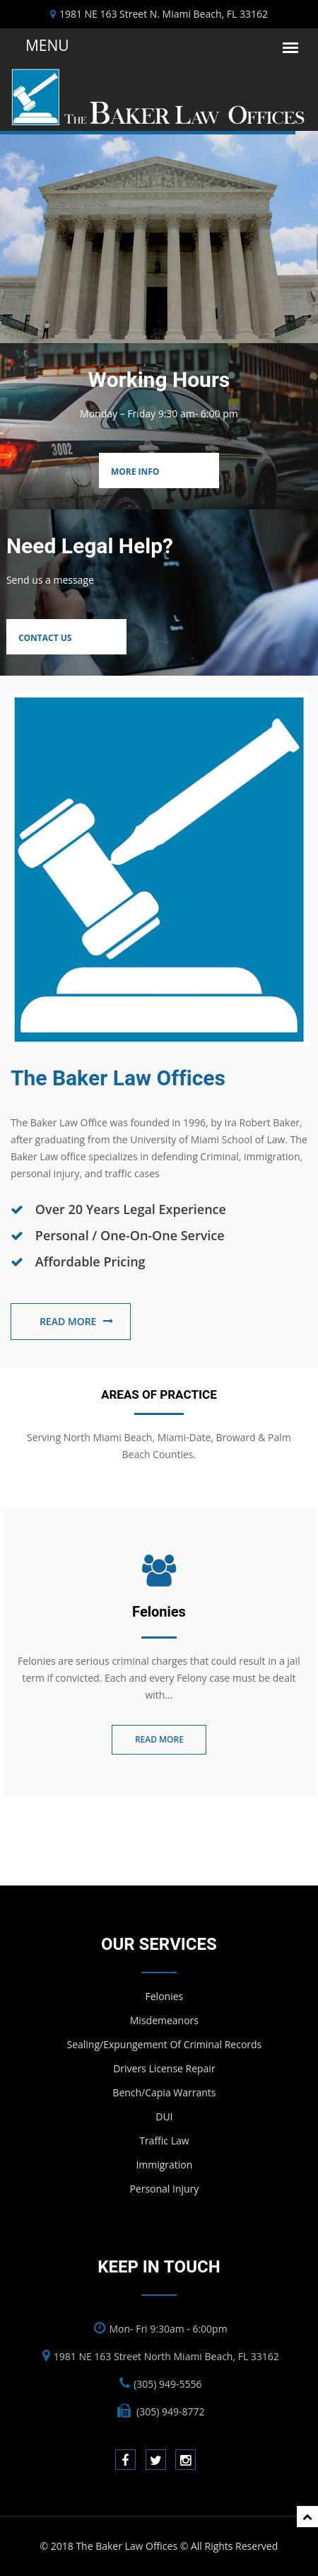 The Baker Law Offices - Miami Gardens FL Lawyers